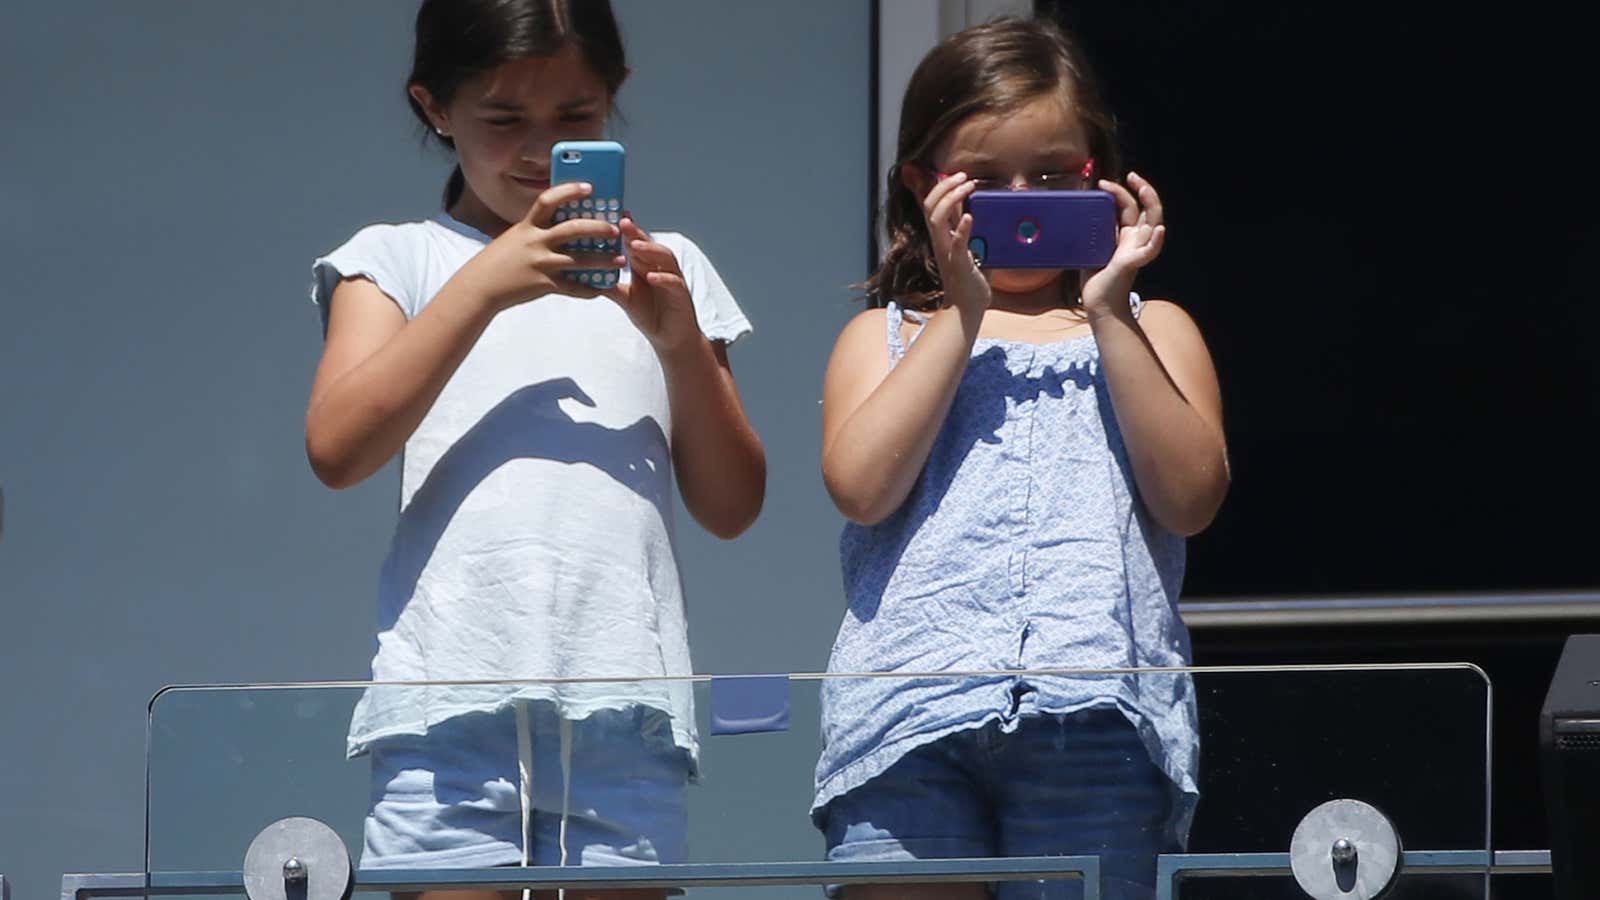 These little kids are probably managing their finances from their smartphones…or playing Candy Crush.